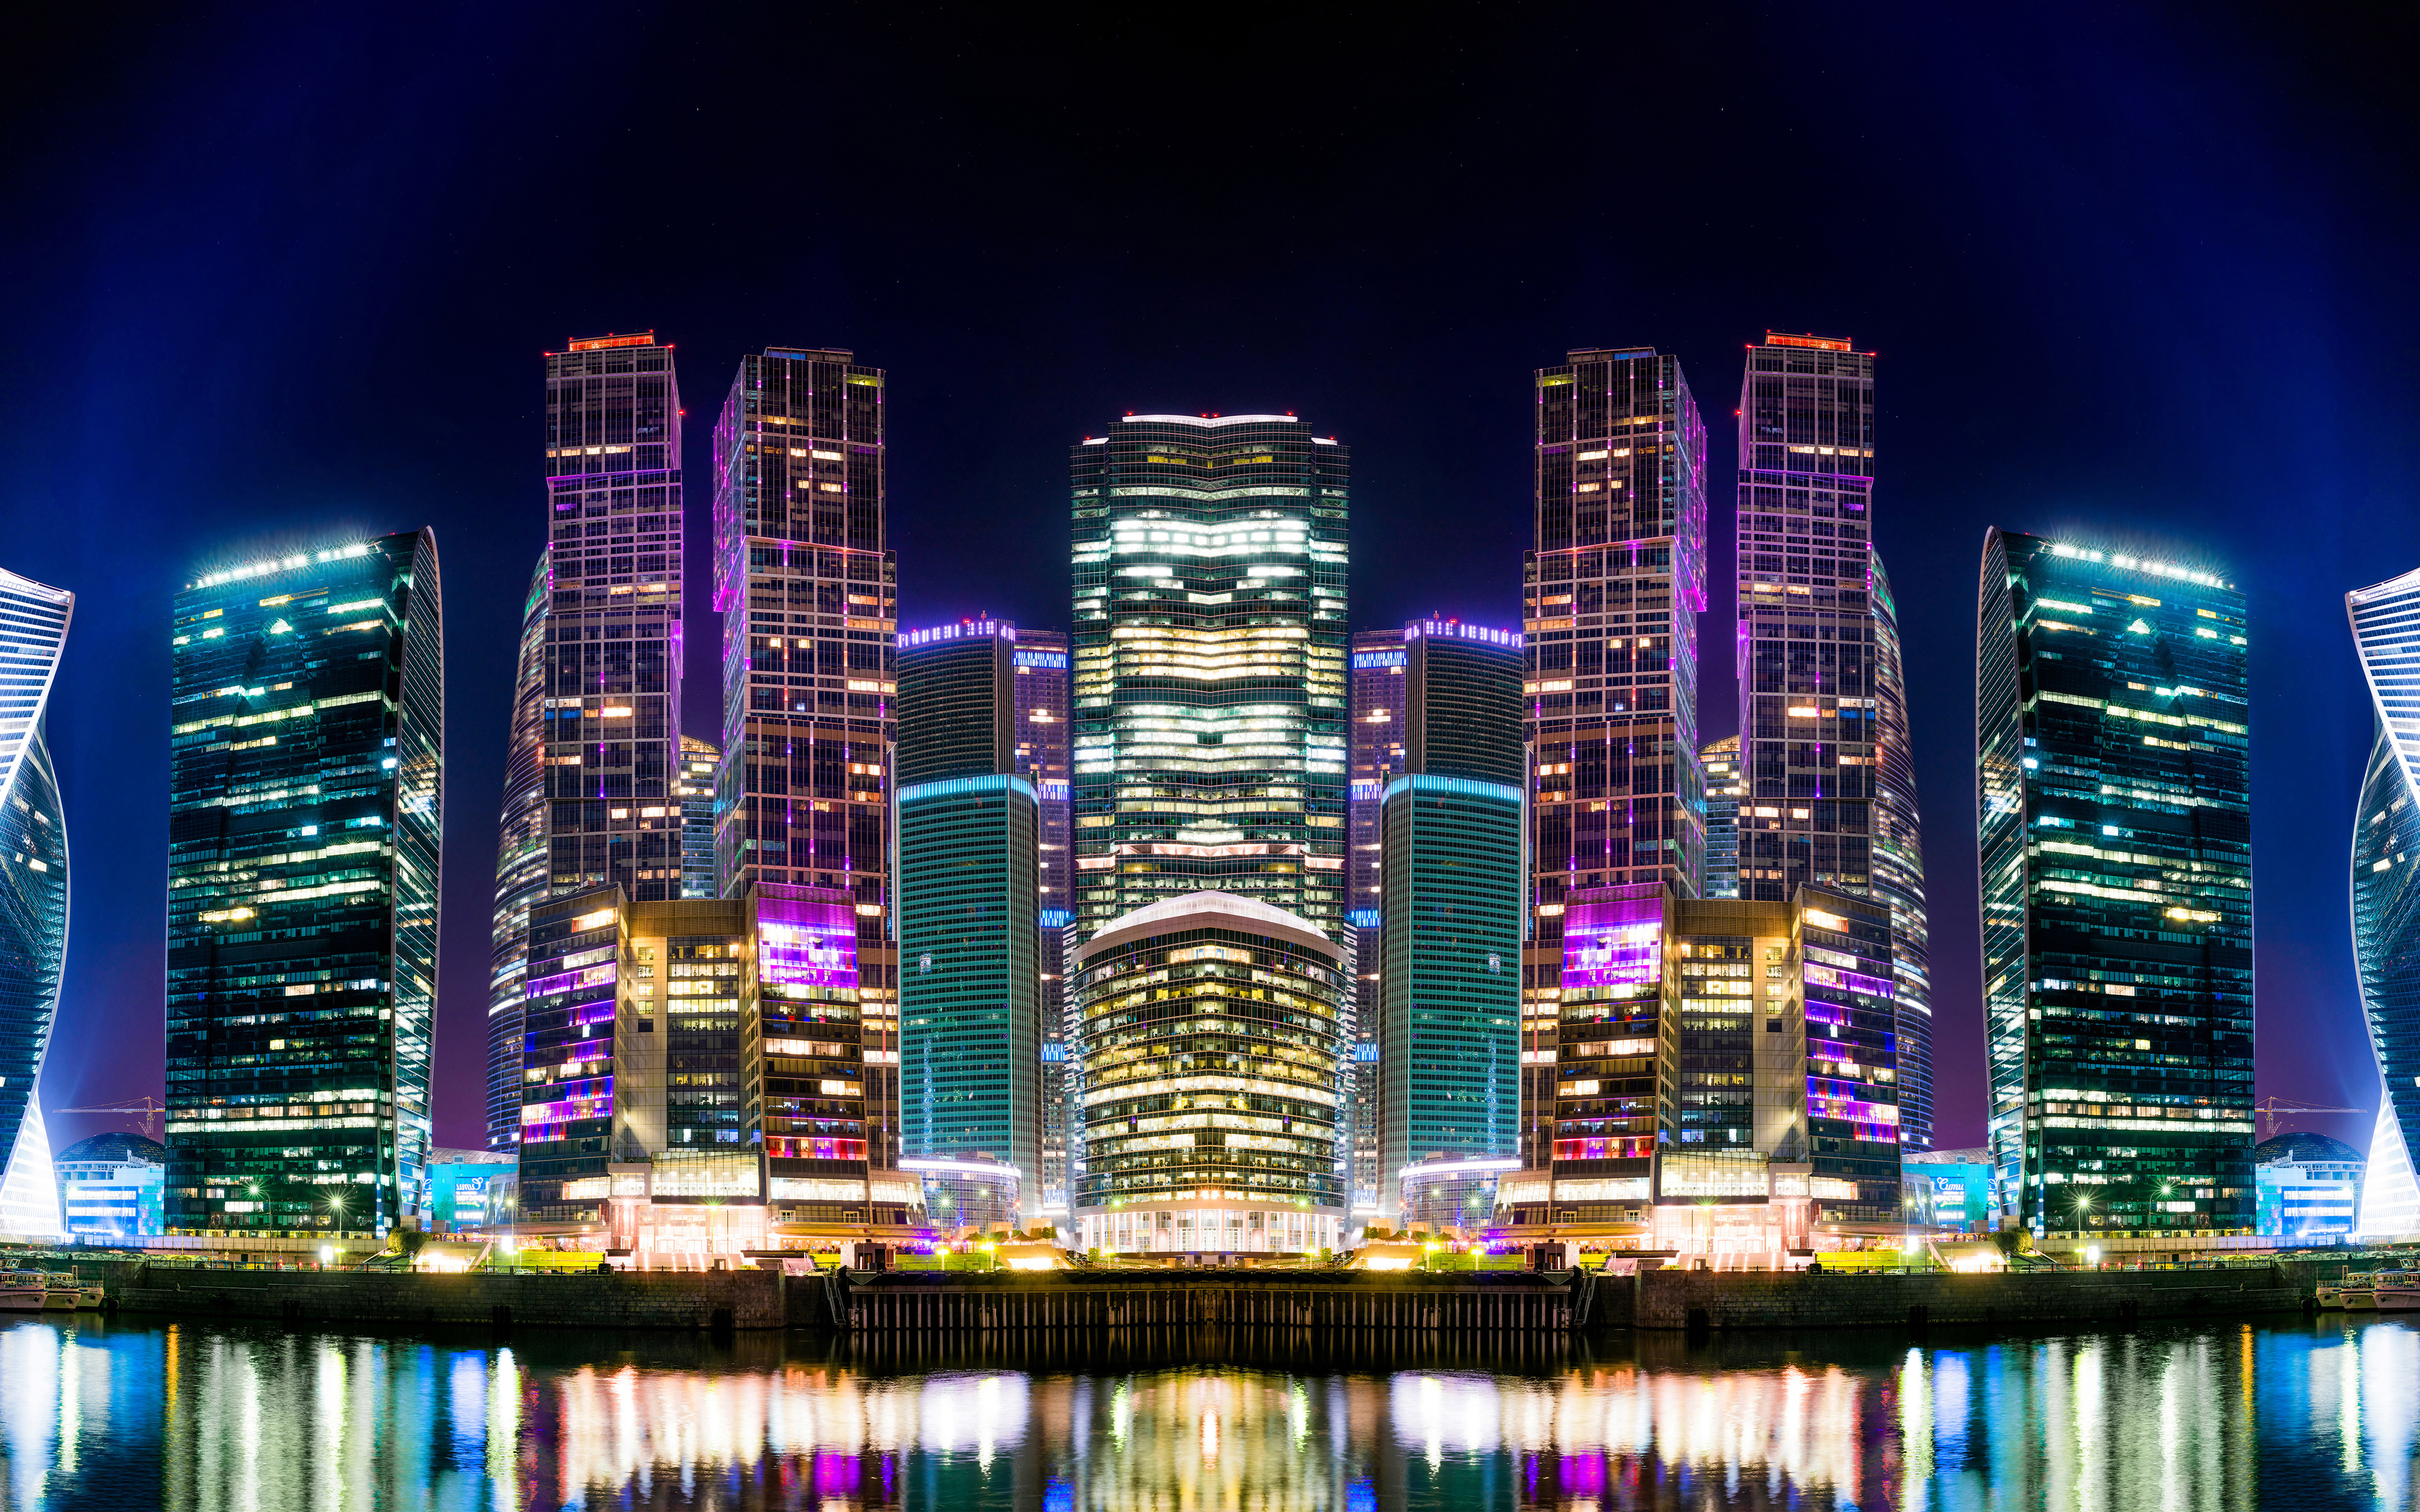 man made, moscow, building, light, night, reflection, river, russia, skyscraper, cities